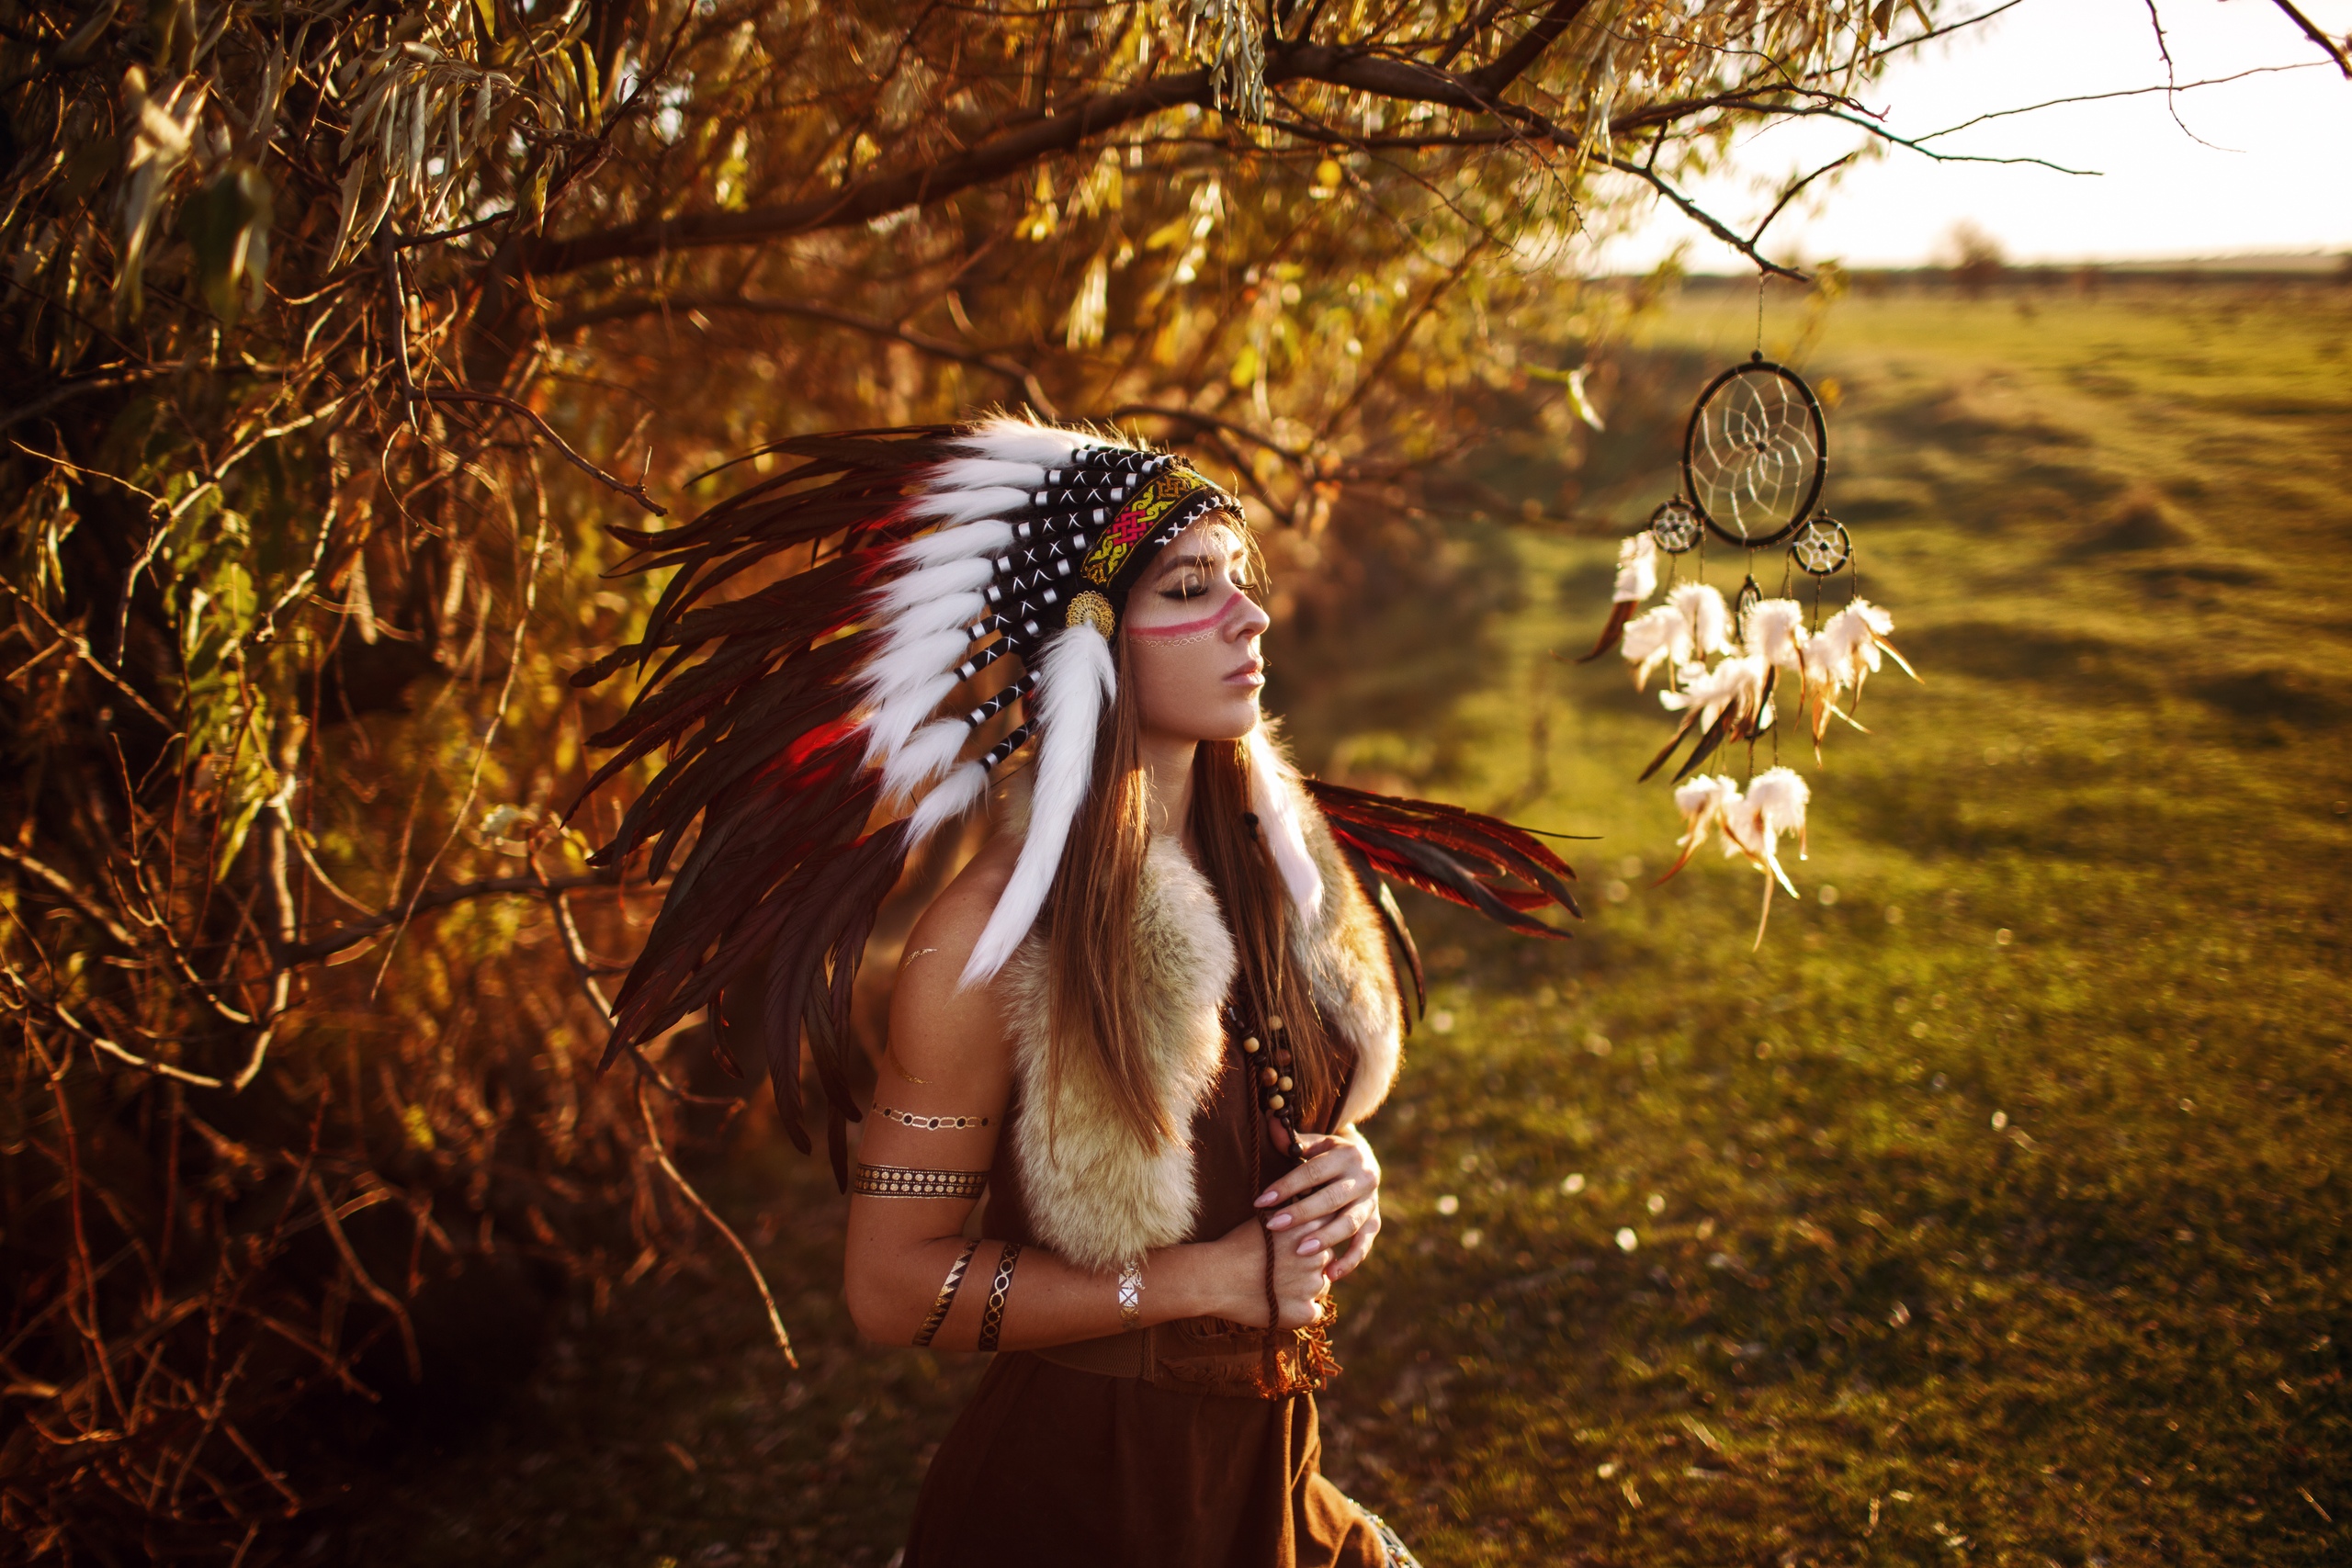 Women Model Brunette Portrait Closed Eyes Outdoors Native Americans Native American Clothing